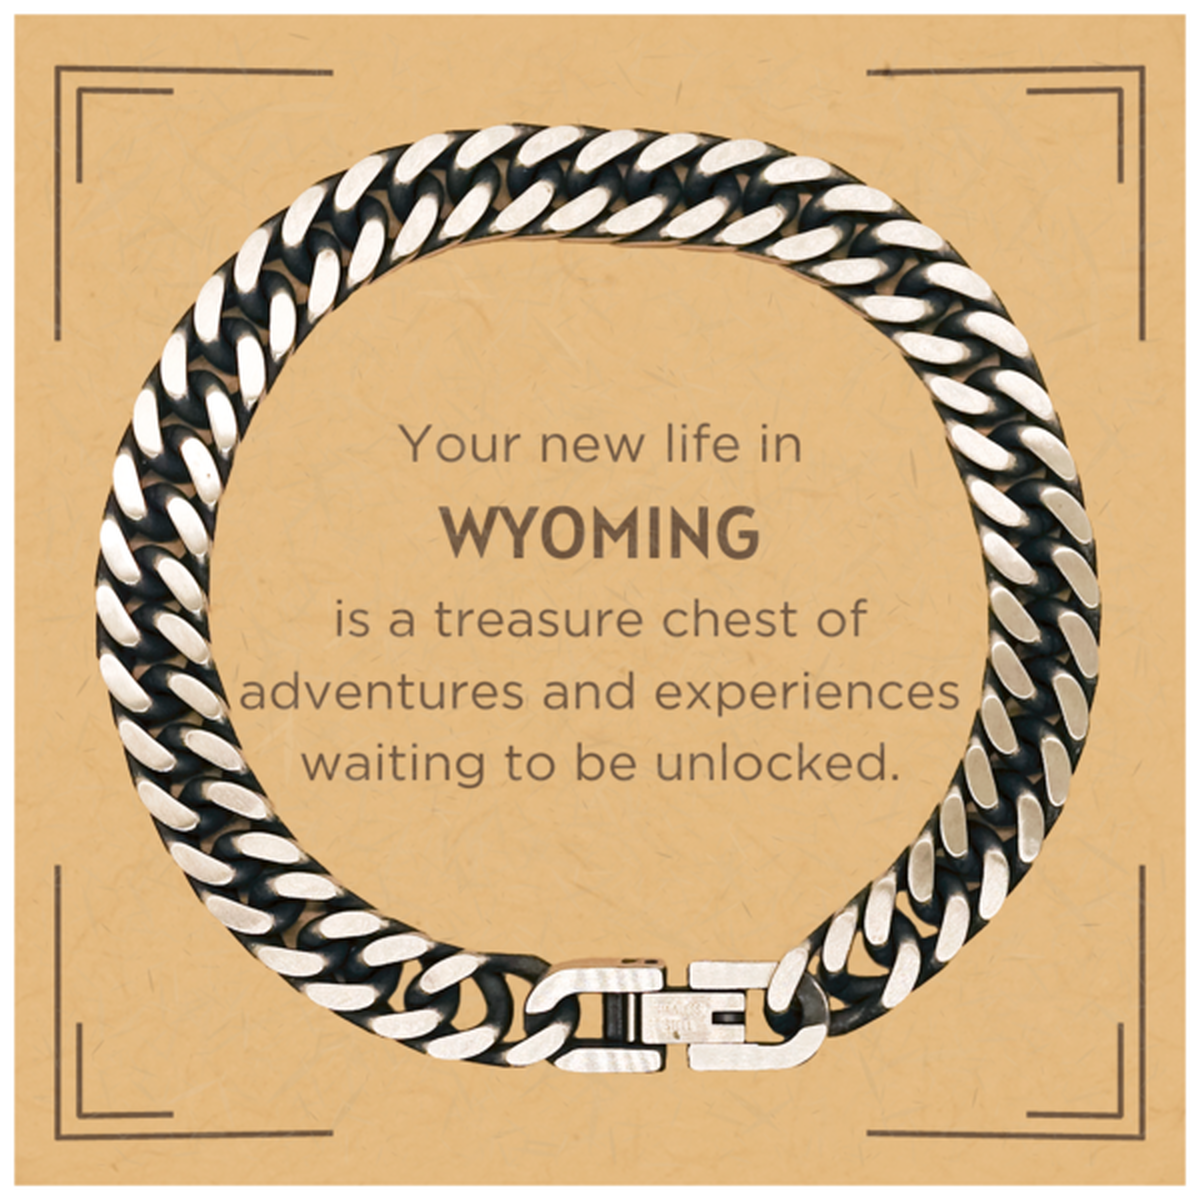 Moving to Wyoming Gifts, Your new life in Wyoming, Long Distance Wyoming Christmas Cuban Link Chain Bracelet For Men, Women, Friends, Coworkers